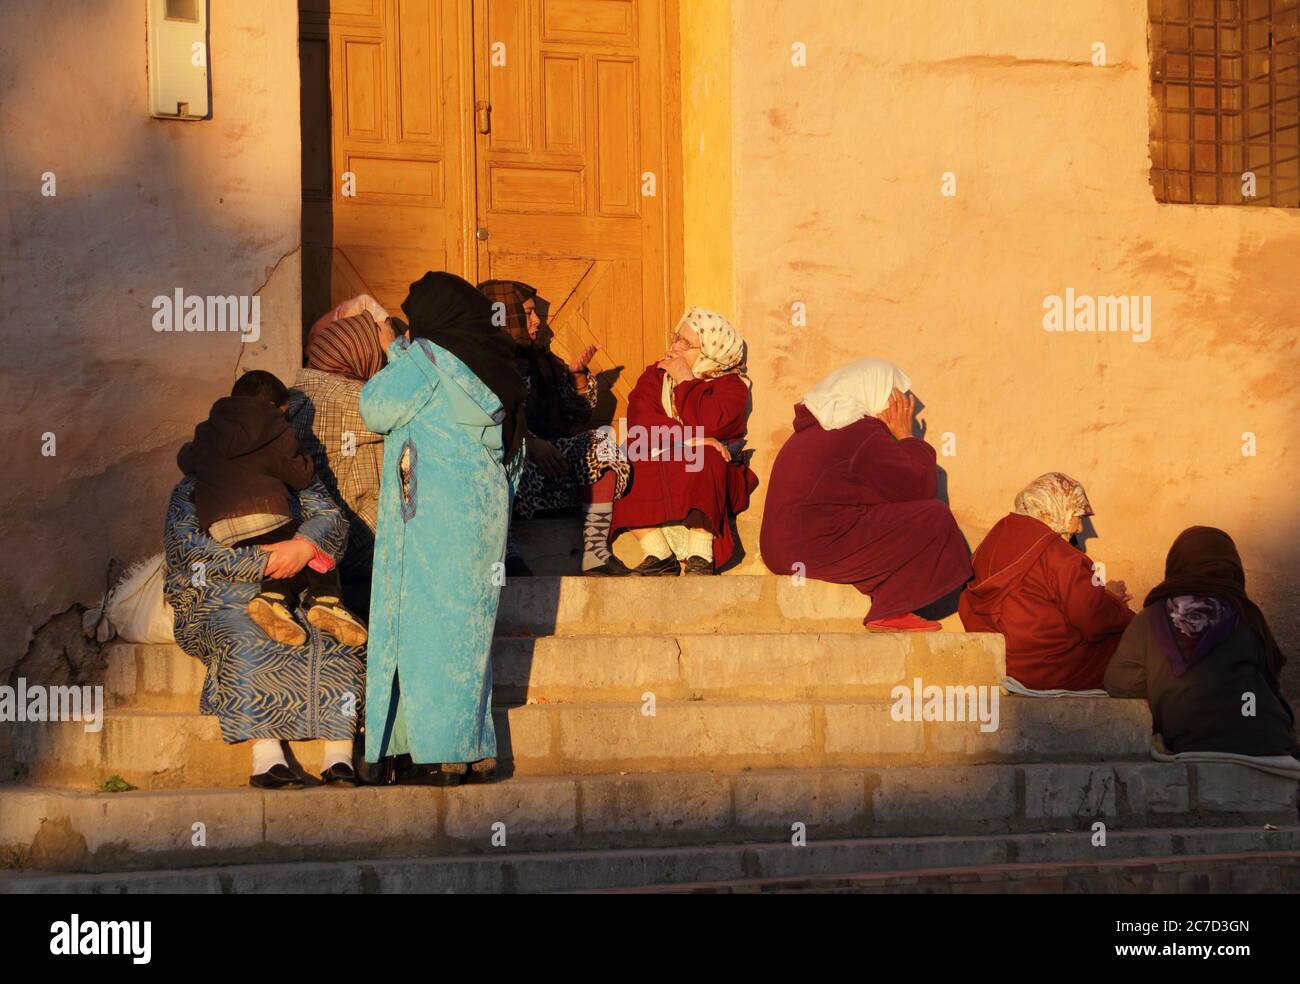 A group of typically dressed Moroccan women sitting on steps in the late afternoon winter sunshine. December 22, 2013 in Meknes, Morocco. UNESCO site. Stock Photo